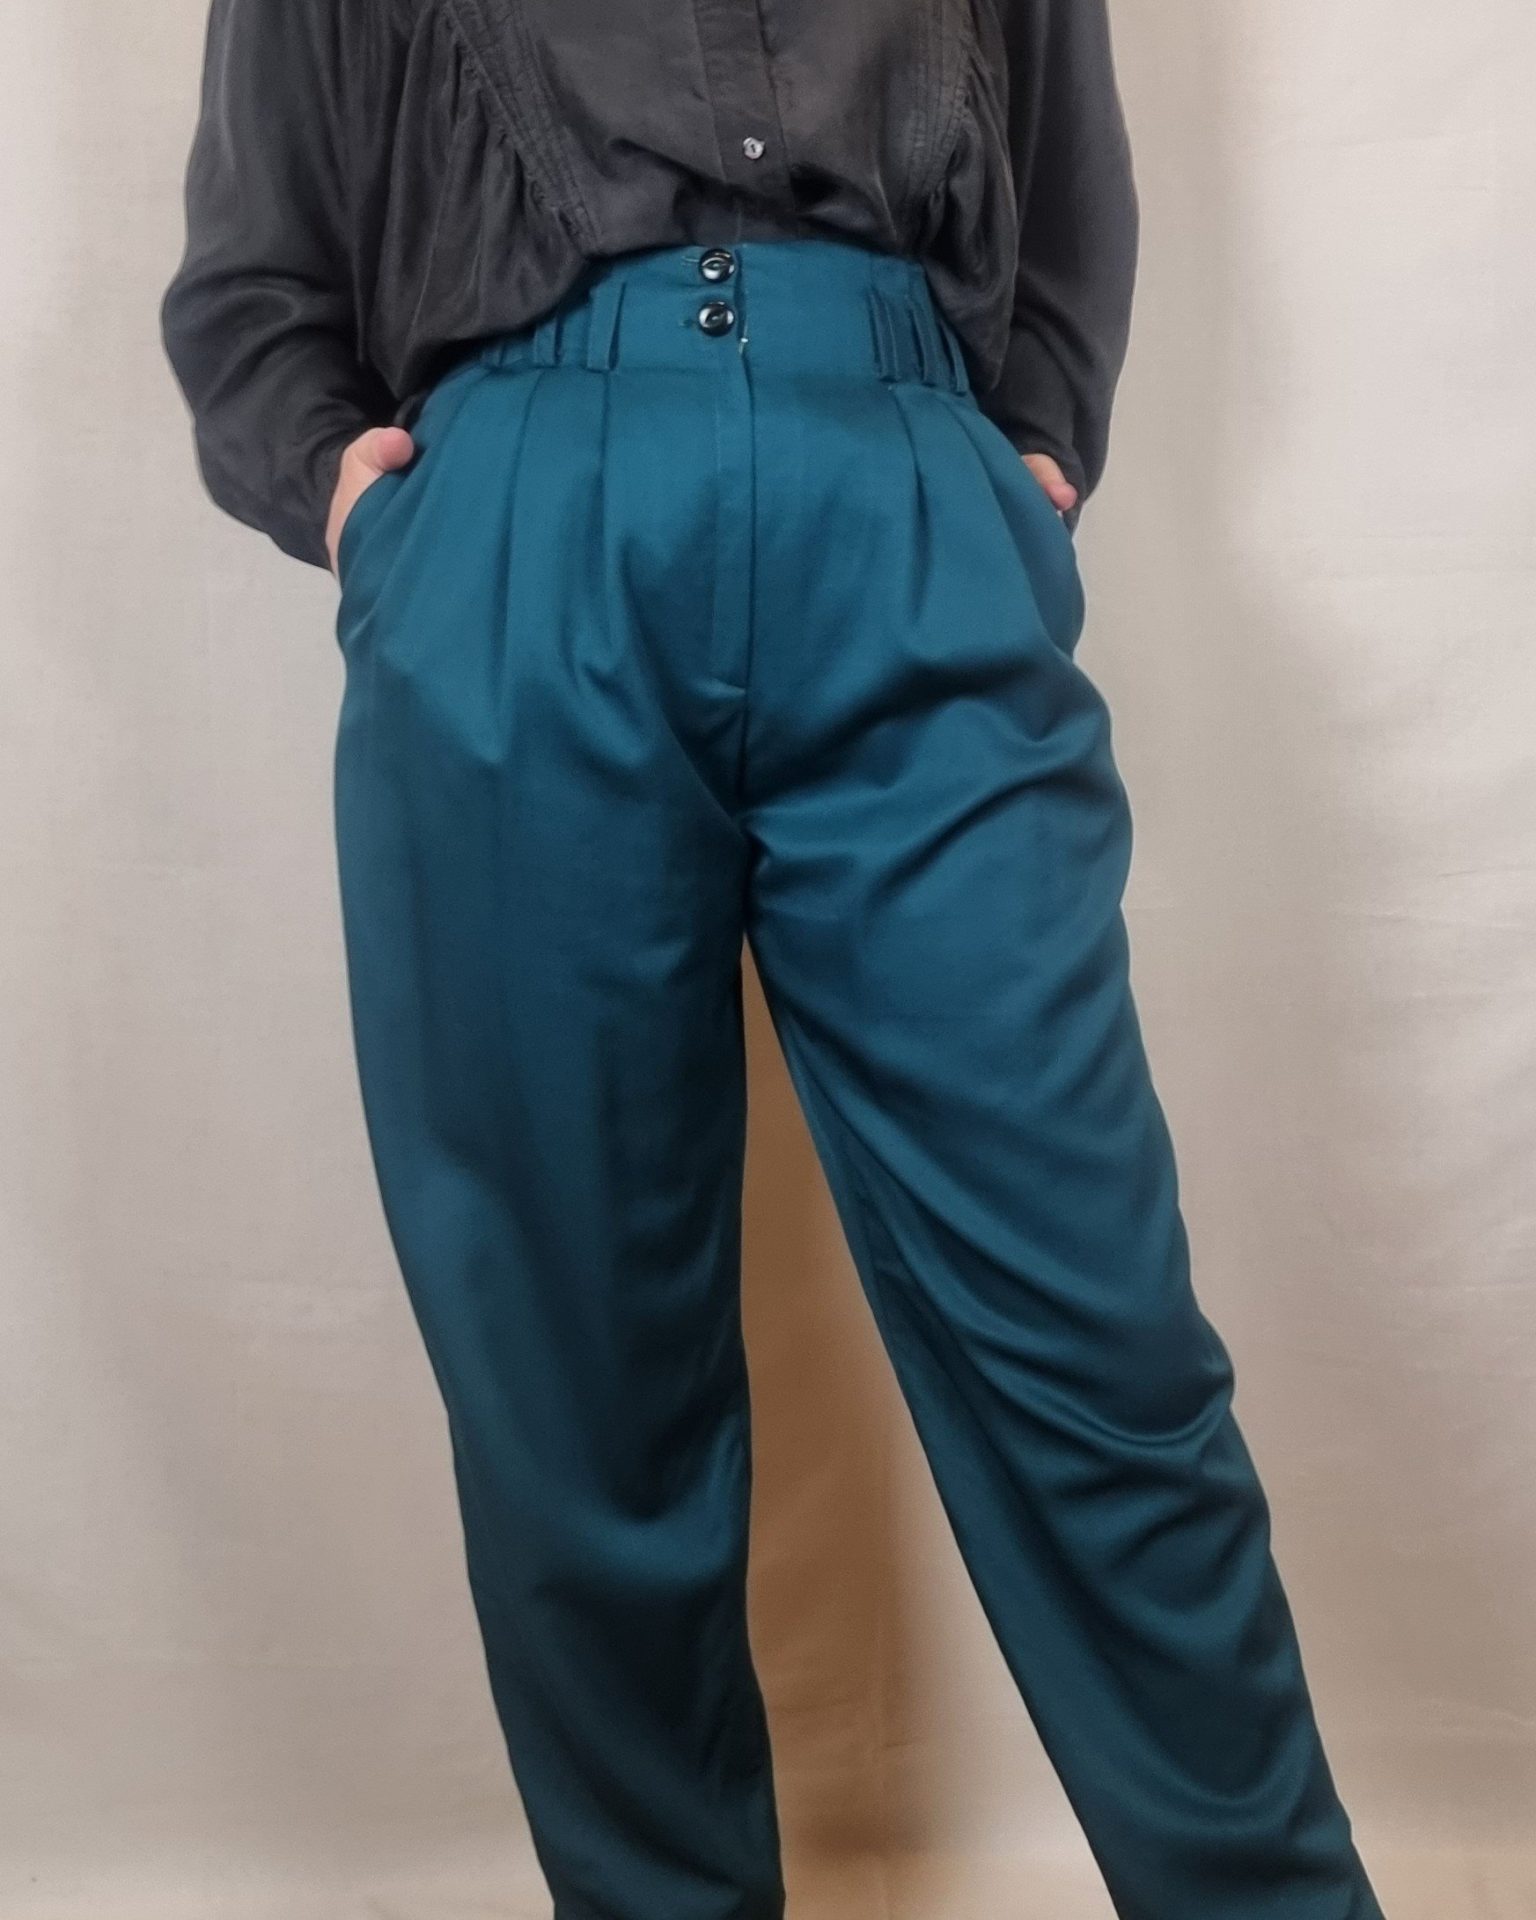 The Assembly Line | Sewing Patterns | High Waisted Trousers – A KIND CLOTH